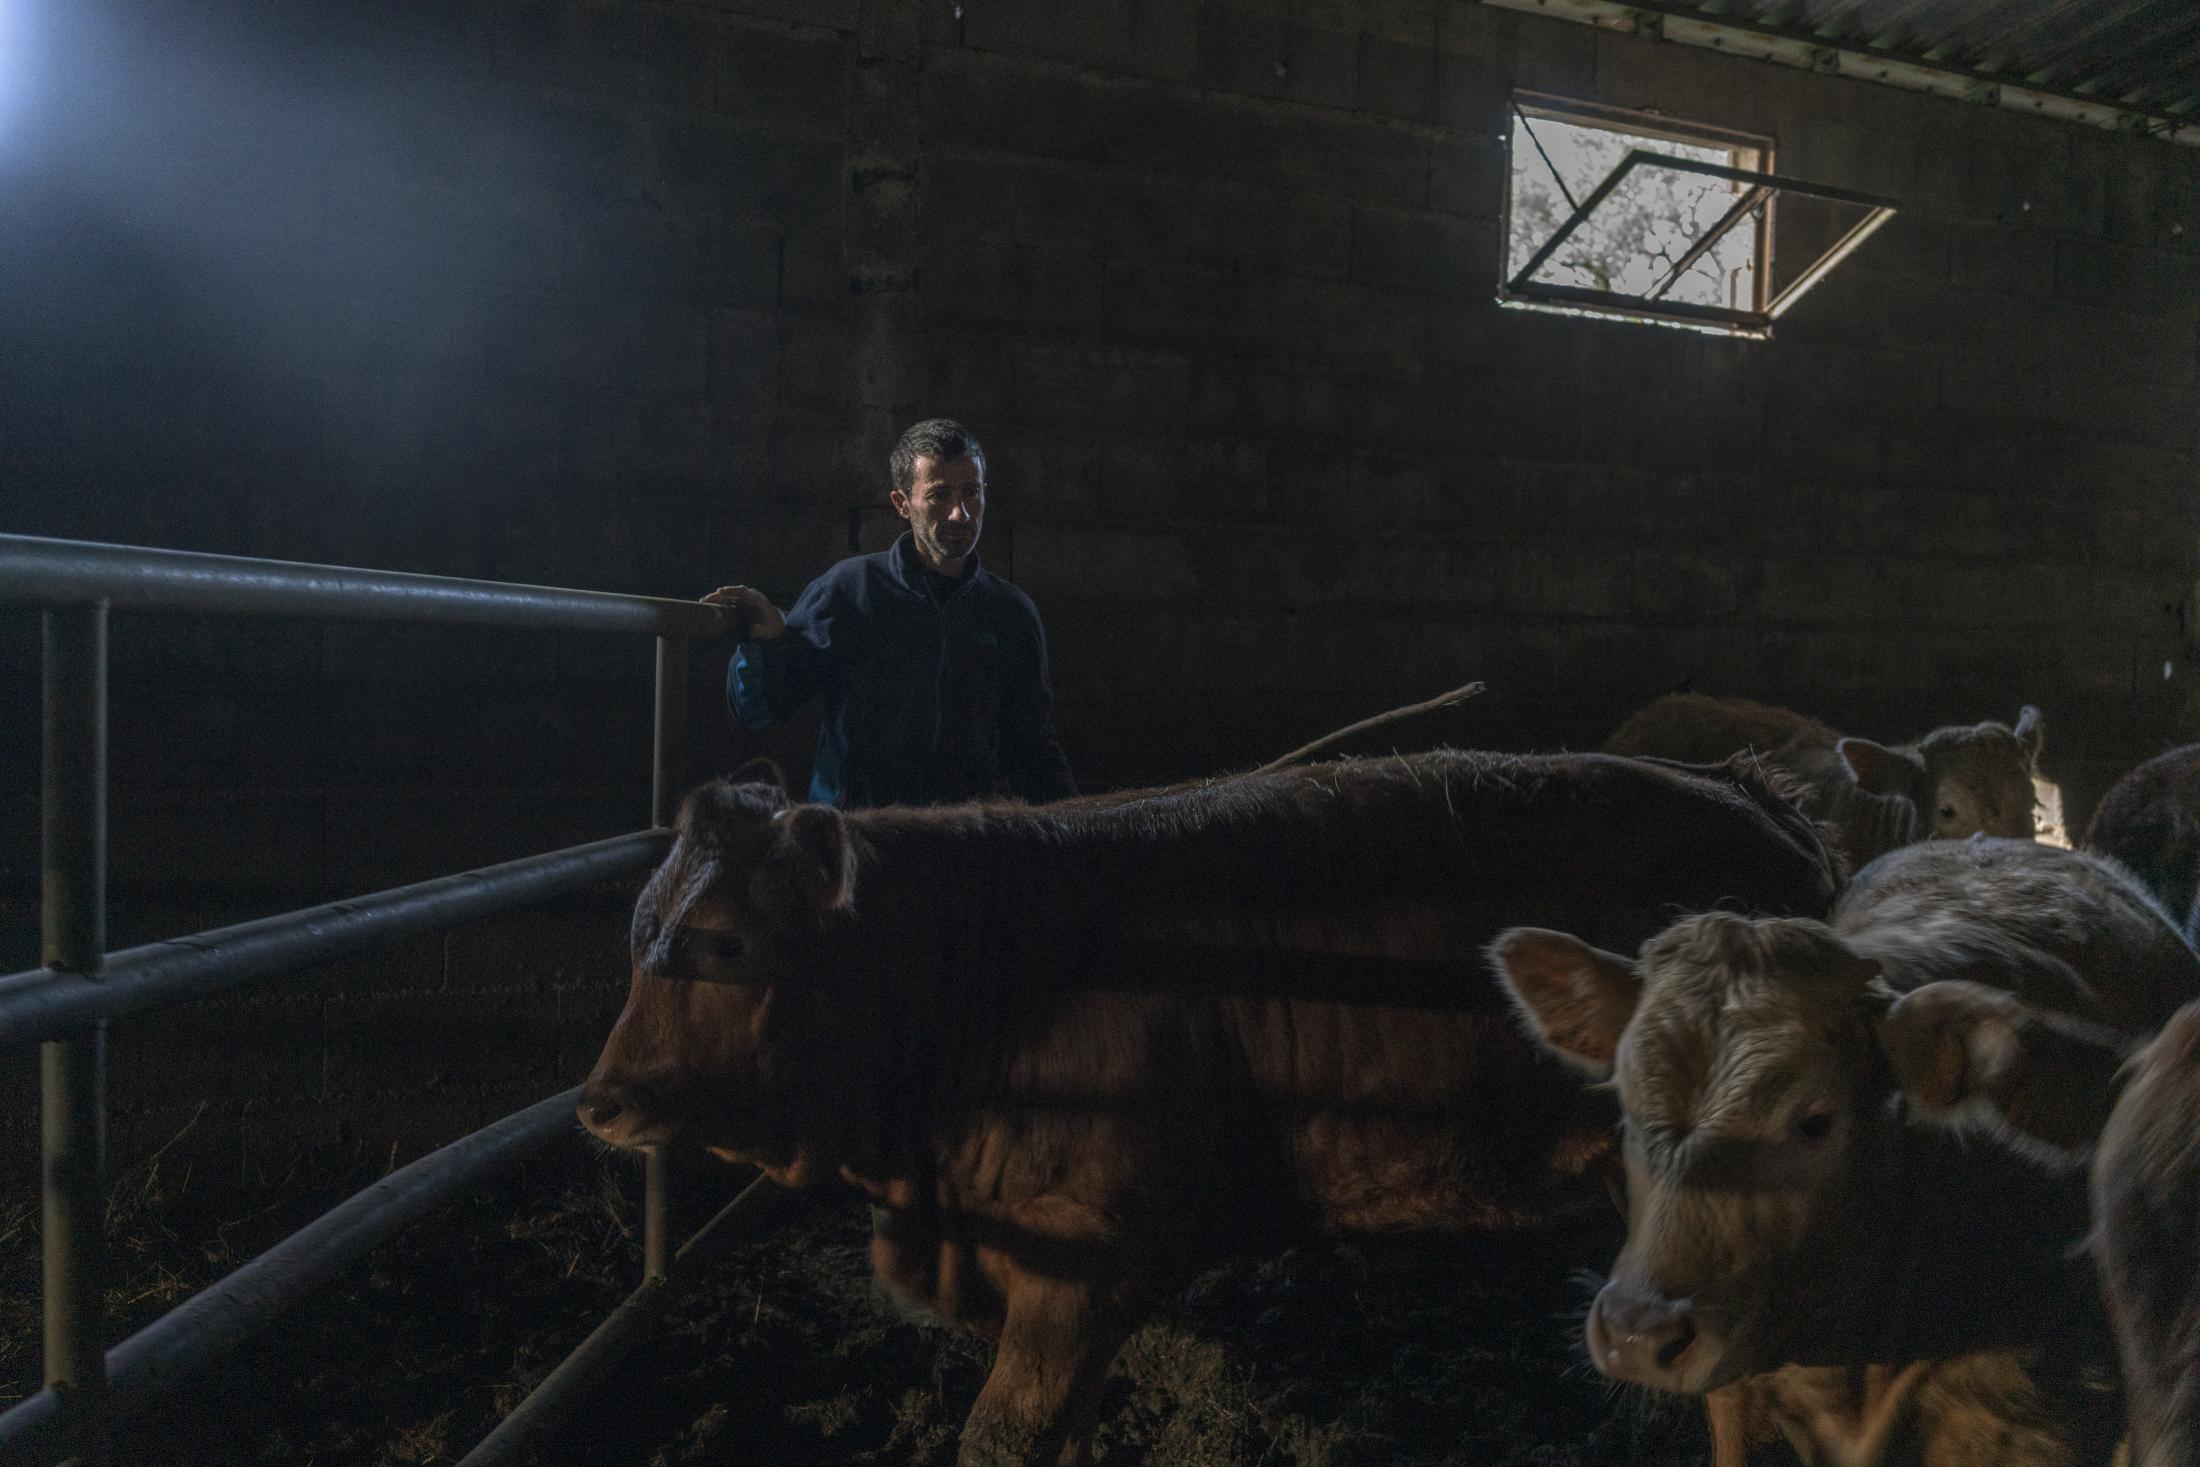 Barroso: An Ancient Farming Culture in Northern Portugal Becomes a World Heritage - Nelson Gomes tends to his cattle at his small property in...